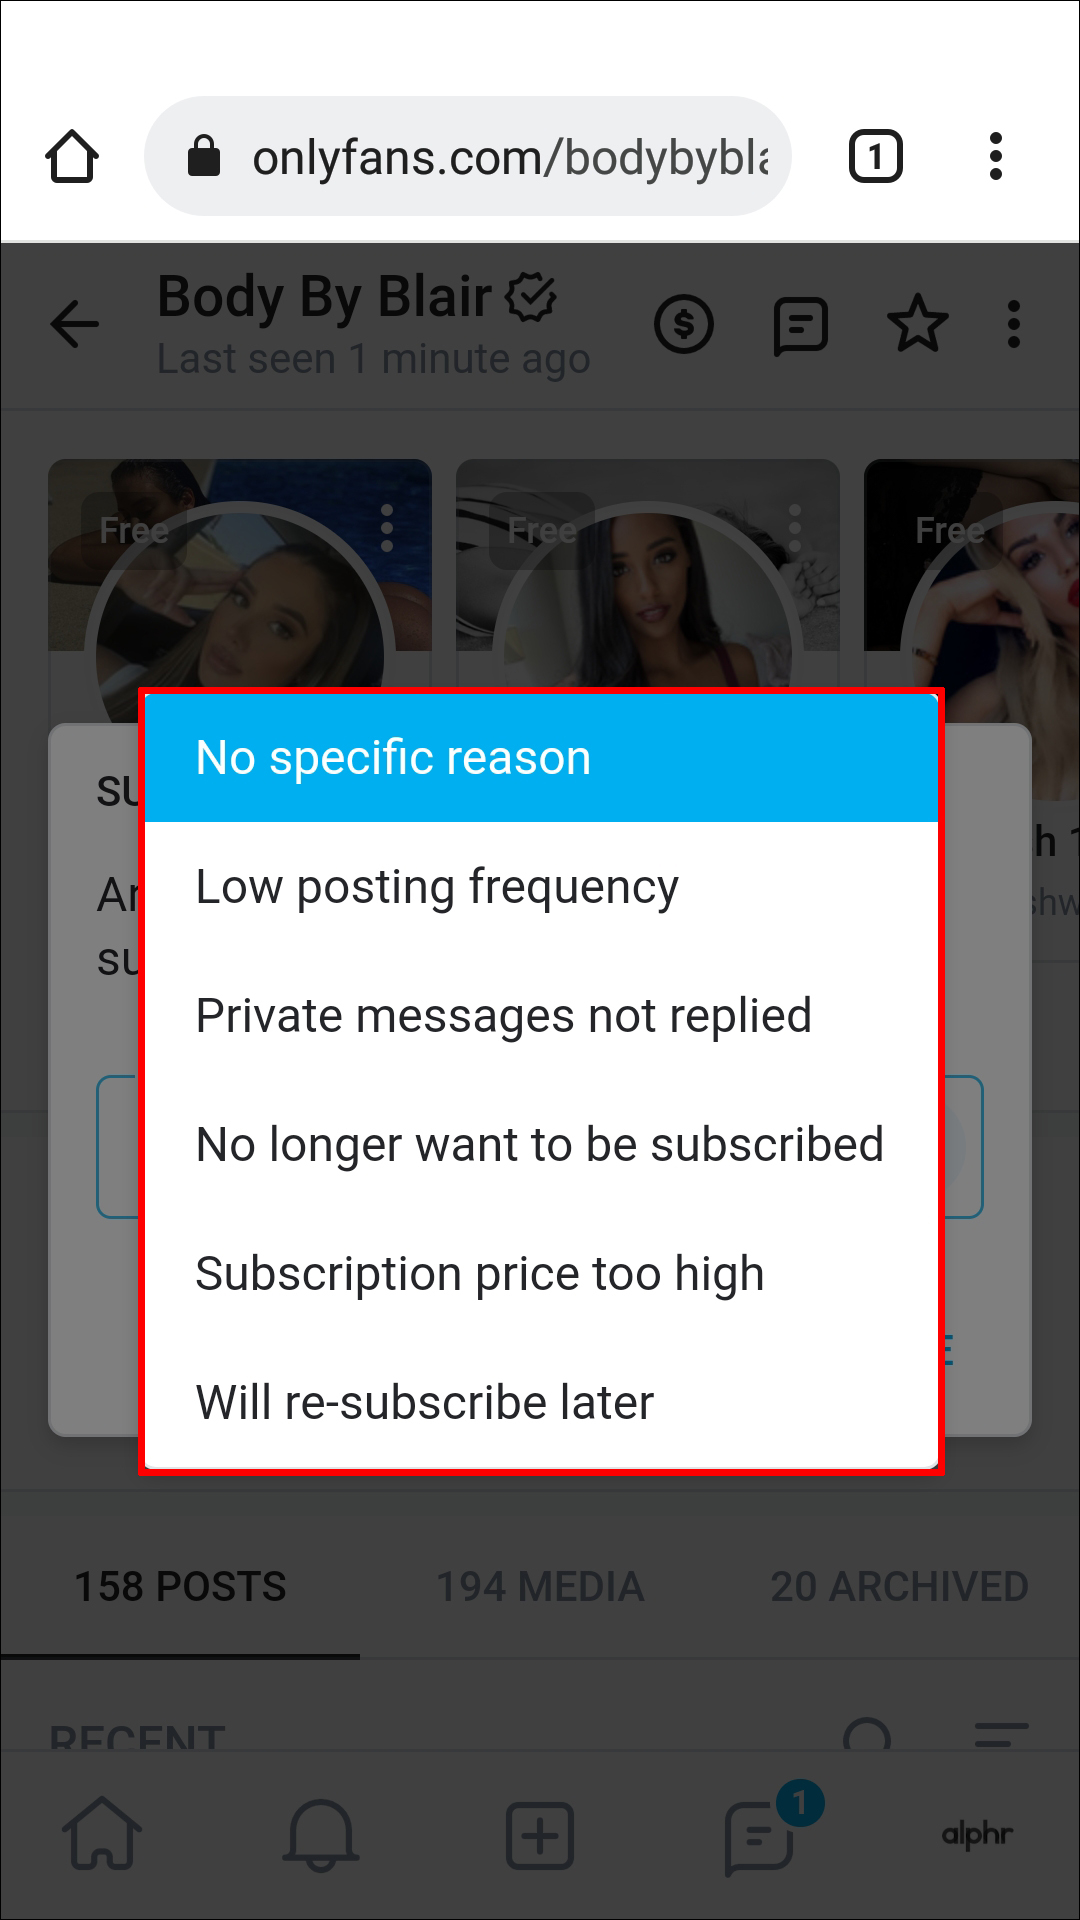 How to unsubscribe from an onlyfans account